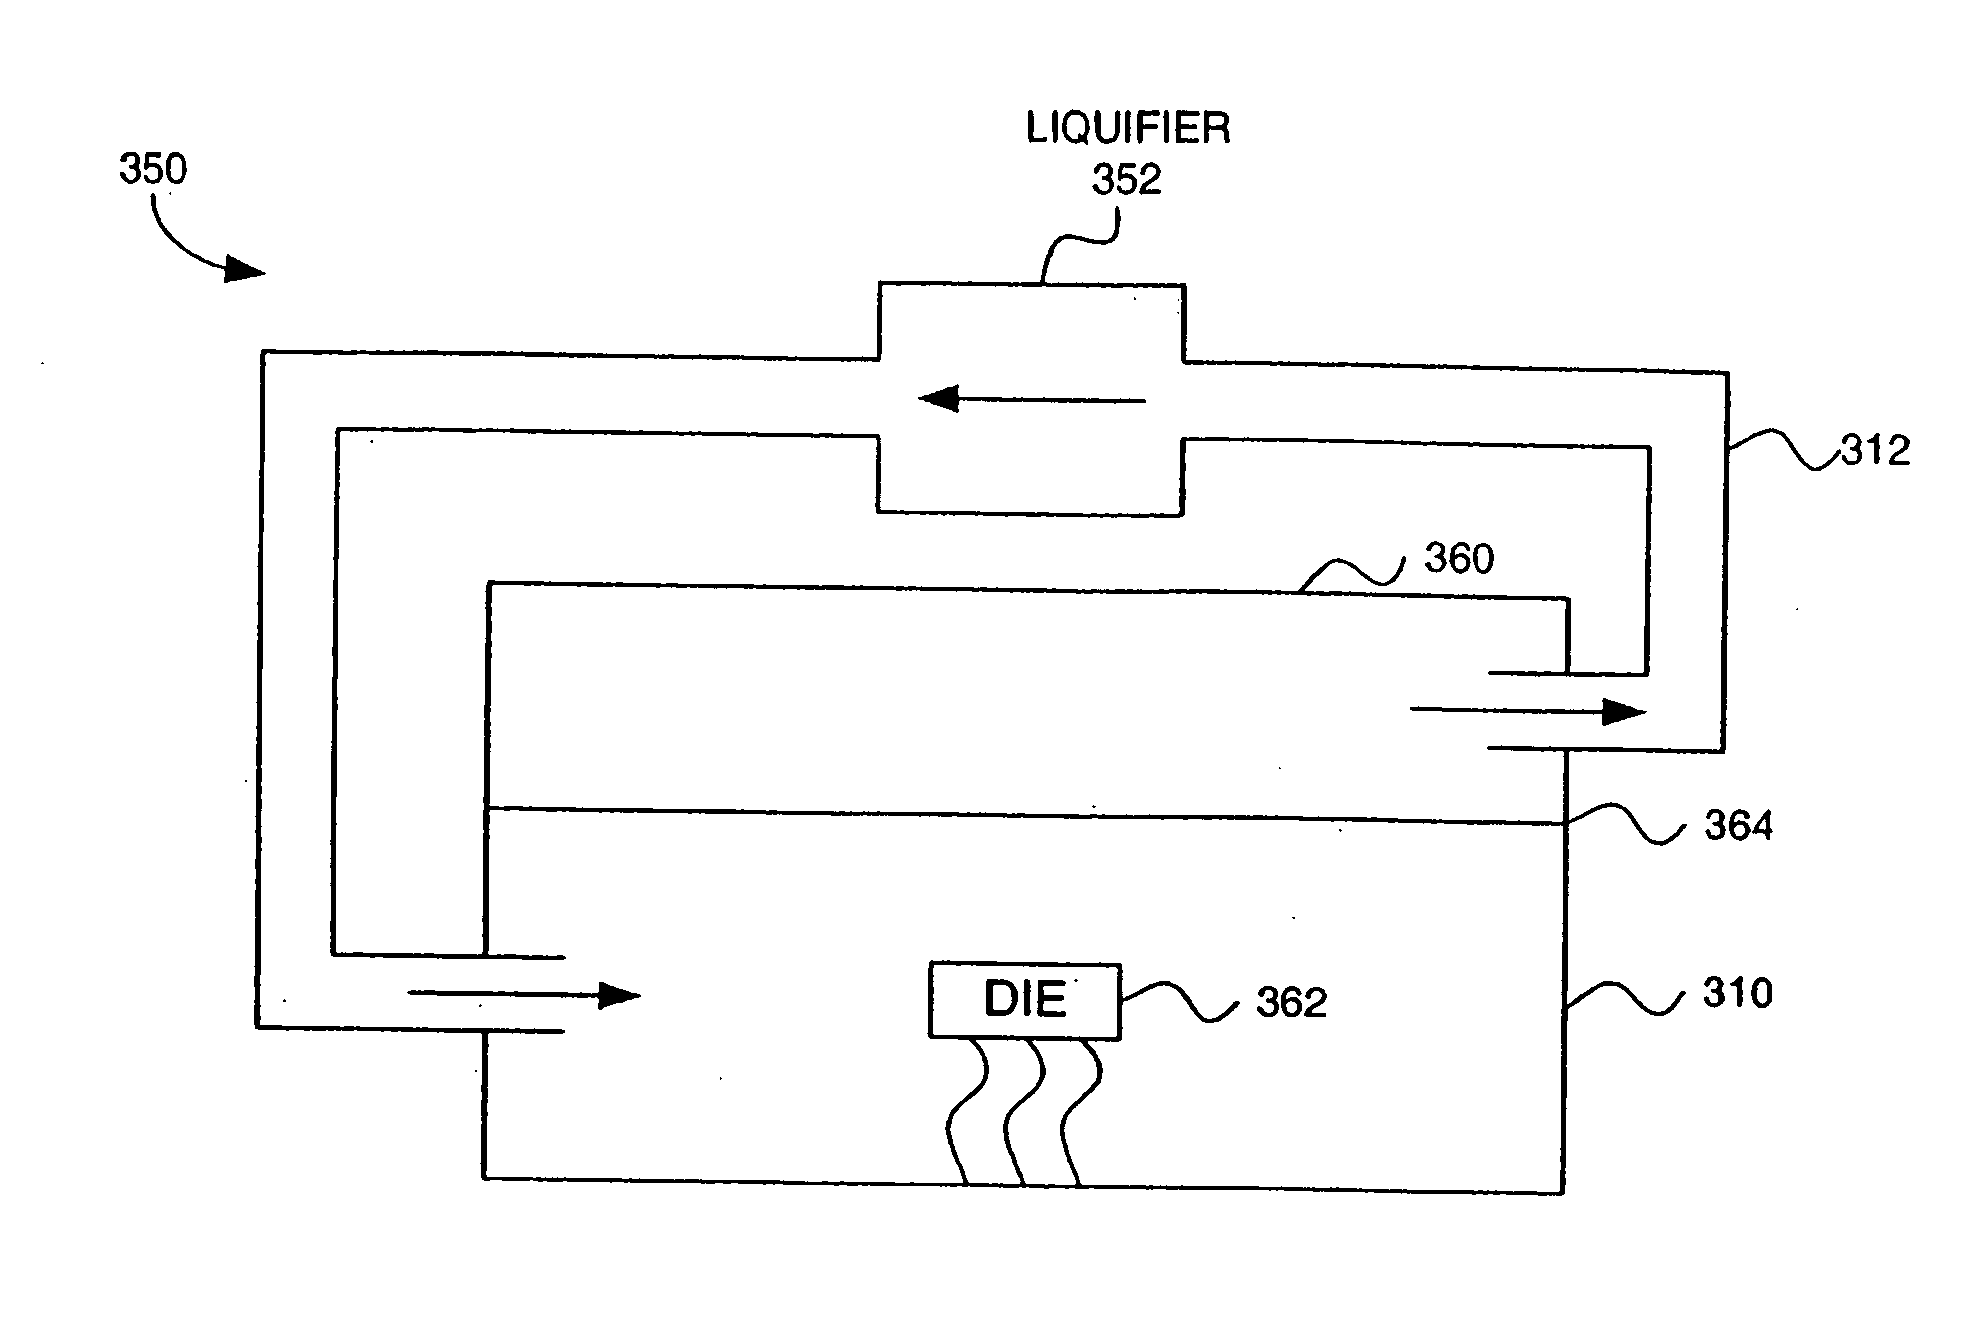 Probe card cooling assembly with direct cooling of active electronic components